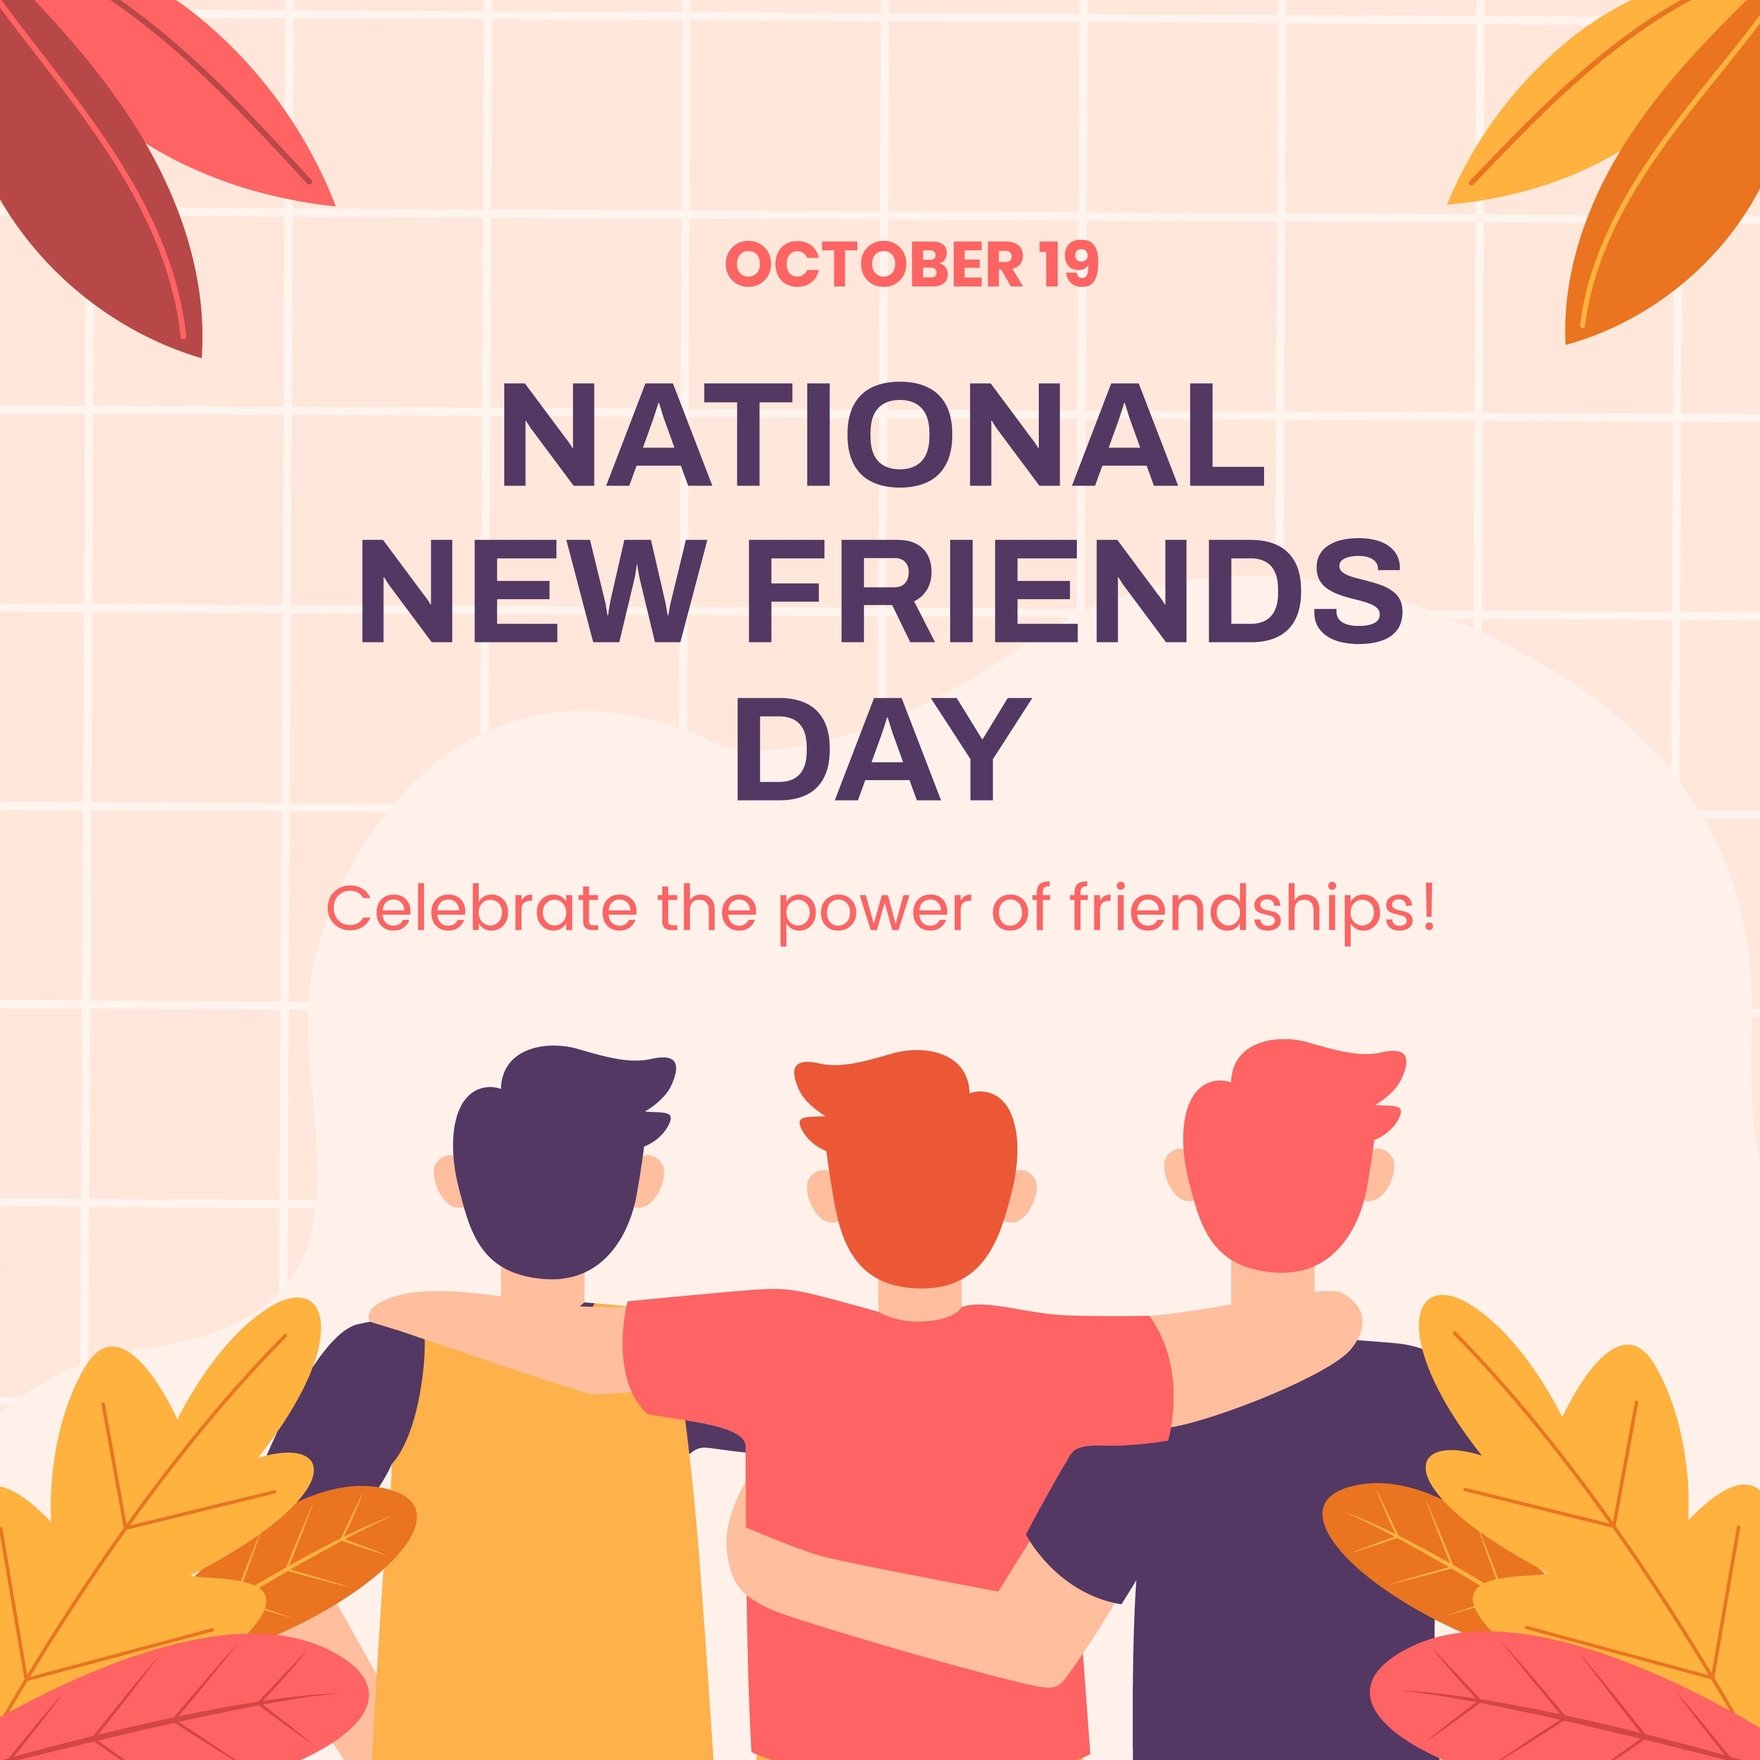 Free National New Friends Day Instagram Post in Illustrator, PSD, EPS, SVG, JPG, PNG